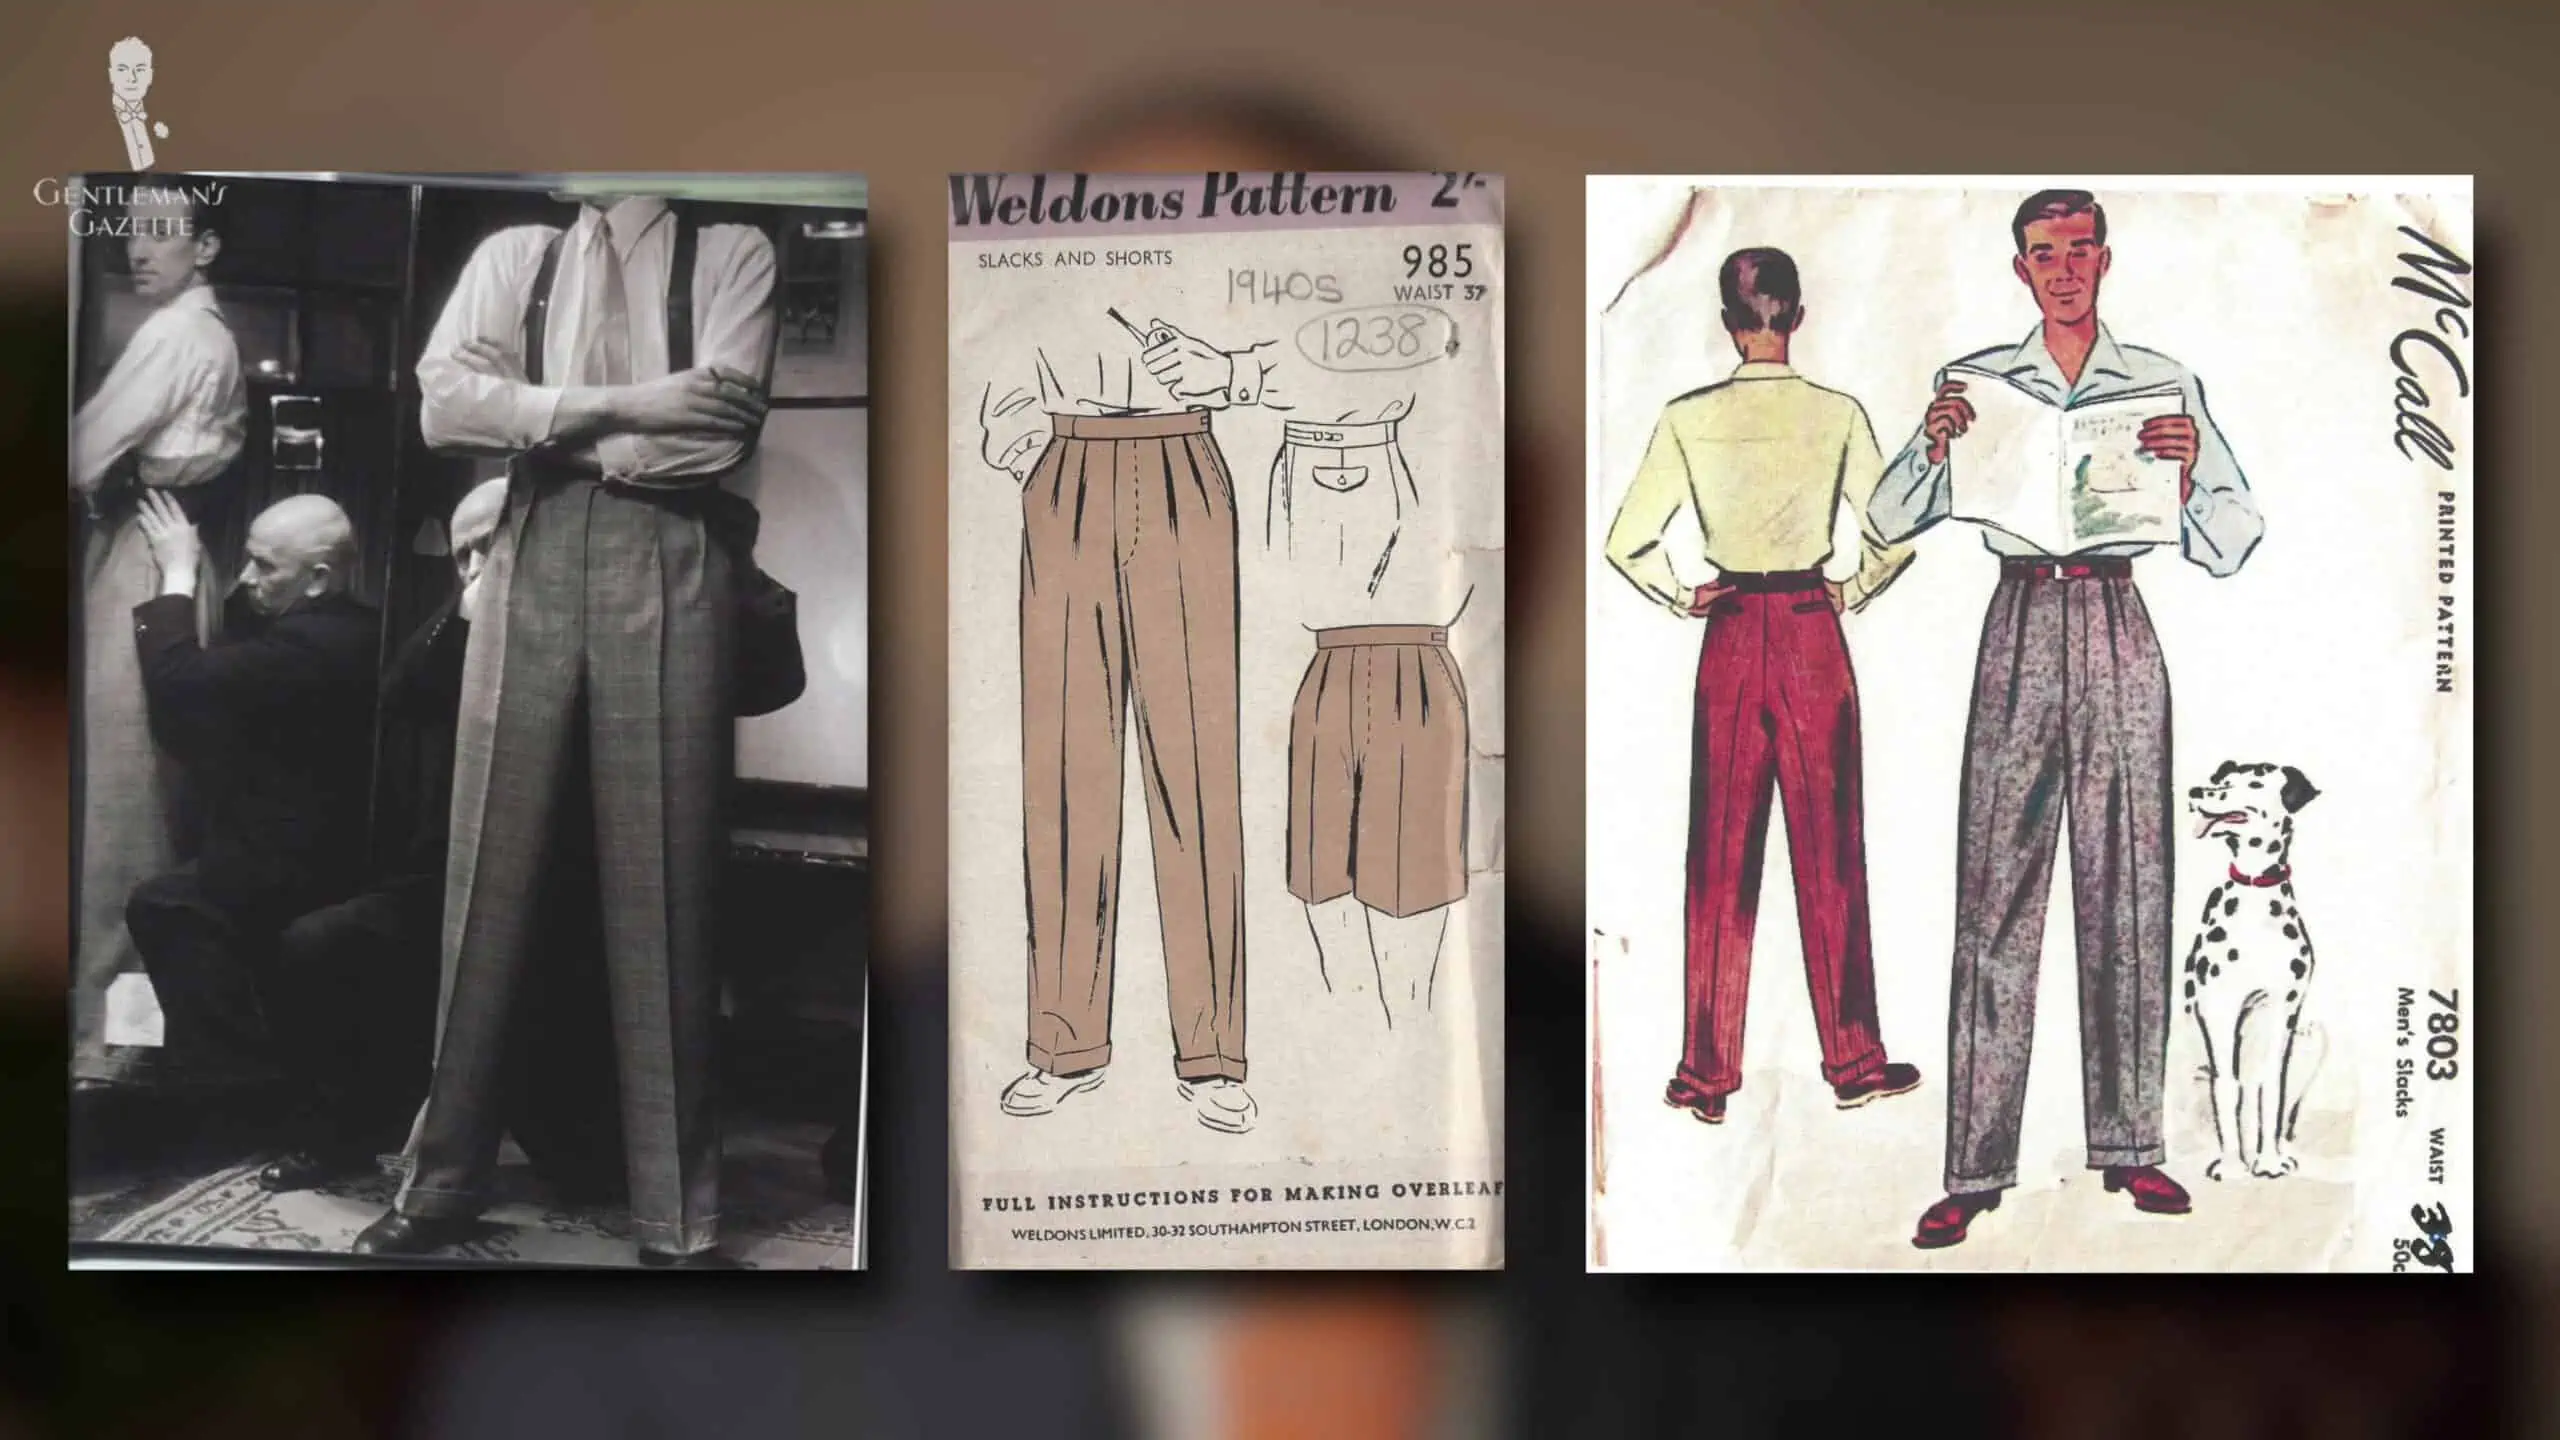 Share 84+ 1940s trousers mens latest - in.duhocakina